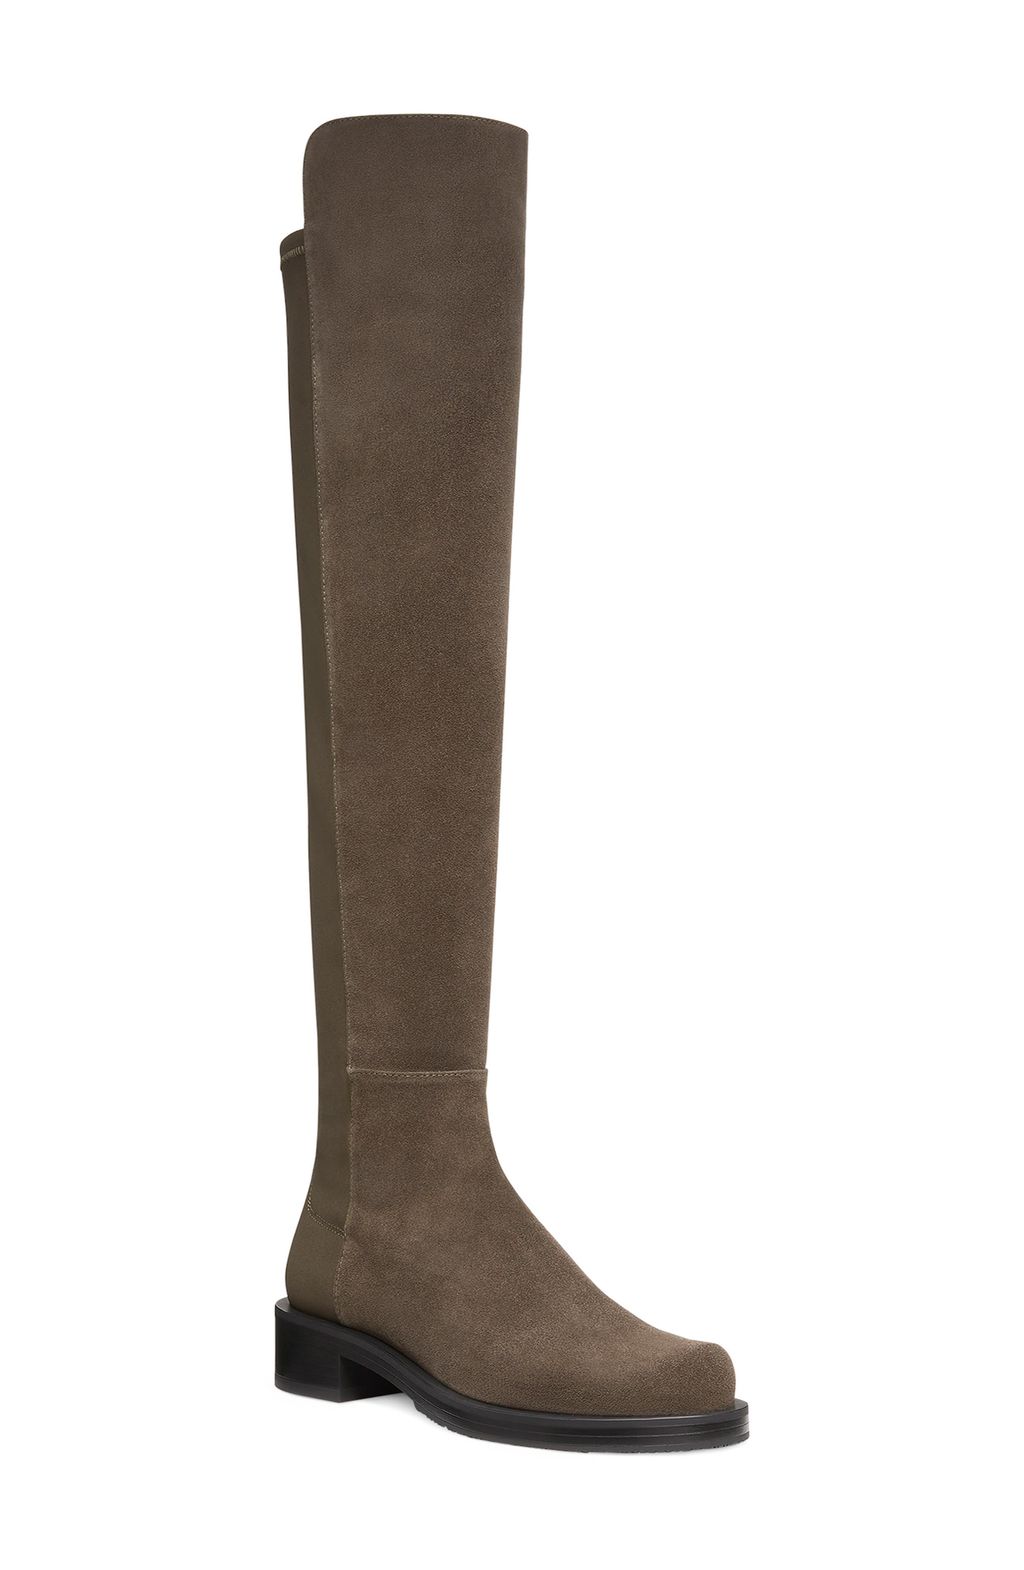 The 14 Best Thigh-High Boots to Buy This Fall | Who What Wear